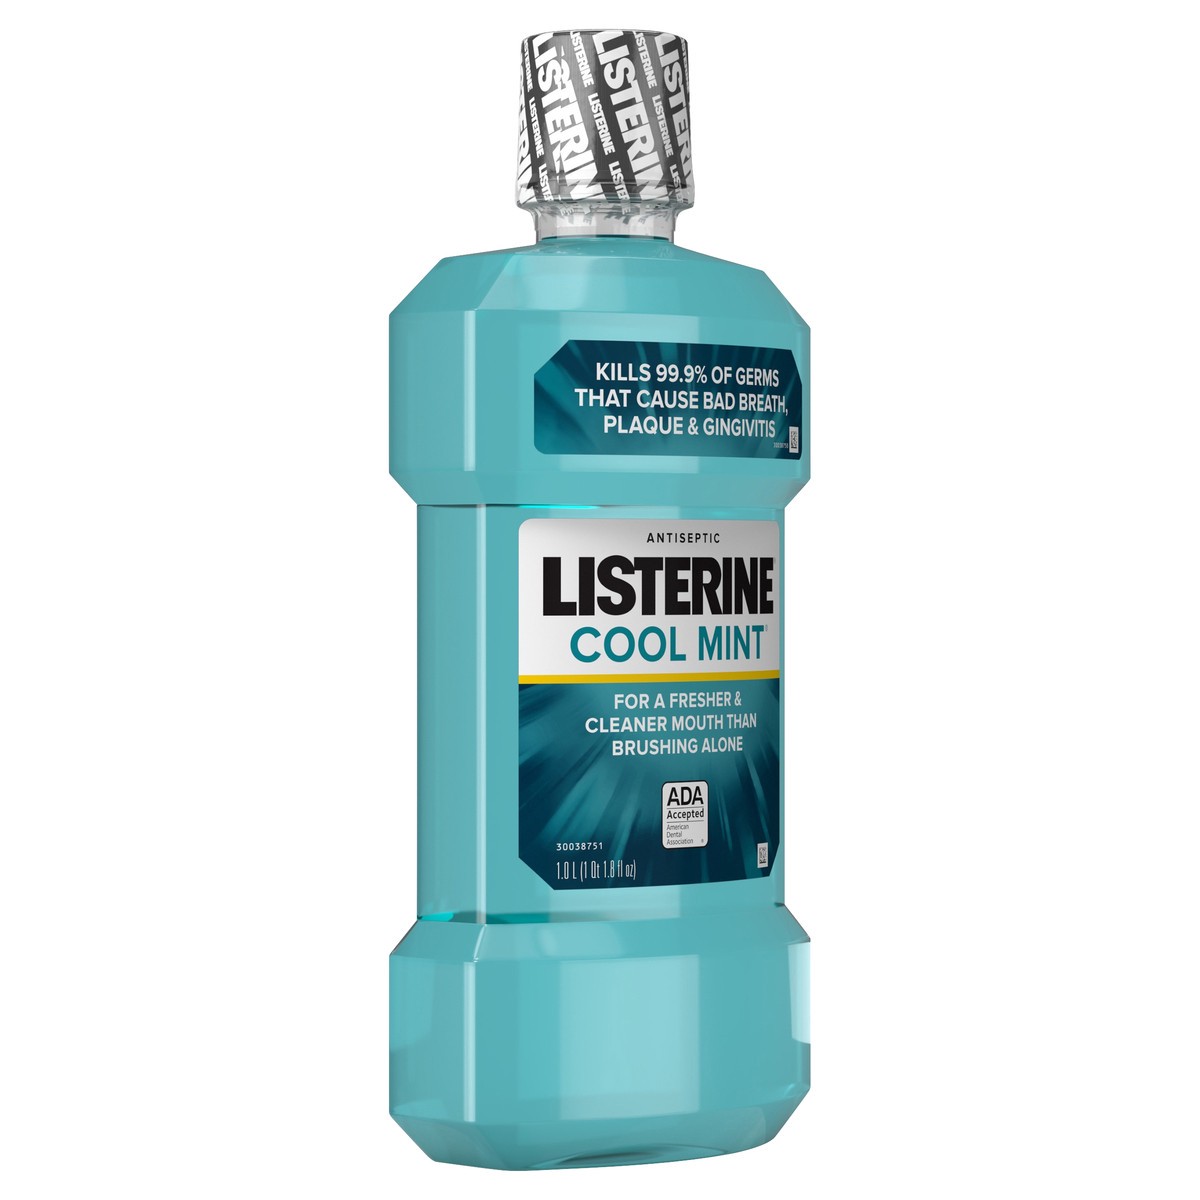 slide 3 of 6, Listerine Cool Mint Antiseptic Mouthwash, Daily Oral Rinse Kills 99% of Germs that Cause Bad Breath, Plaque and Gingivitis for a Fresher, Cleaner Mouth, Cool Mint Flavor, 1.0 L, 1 L